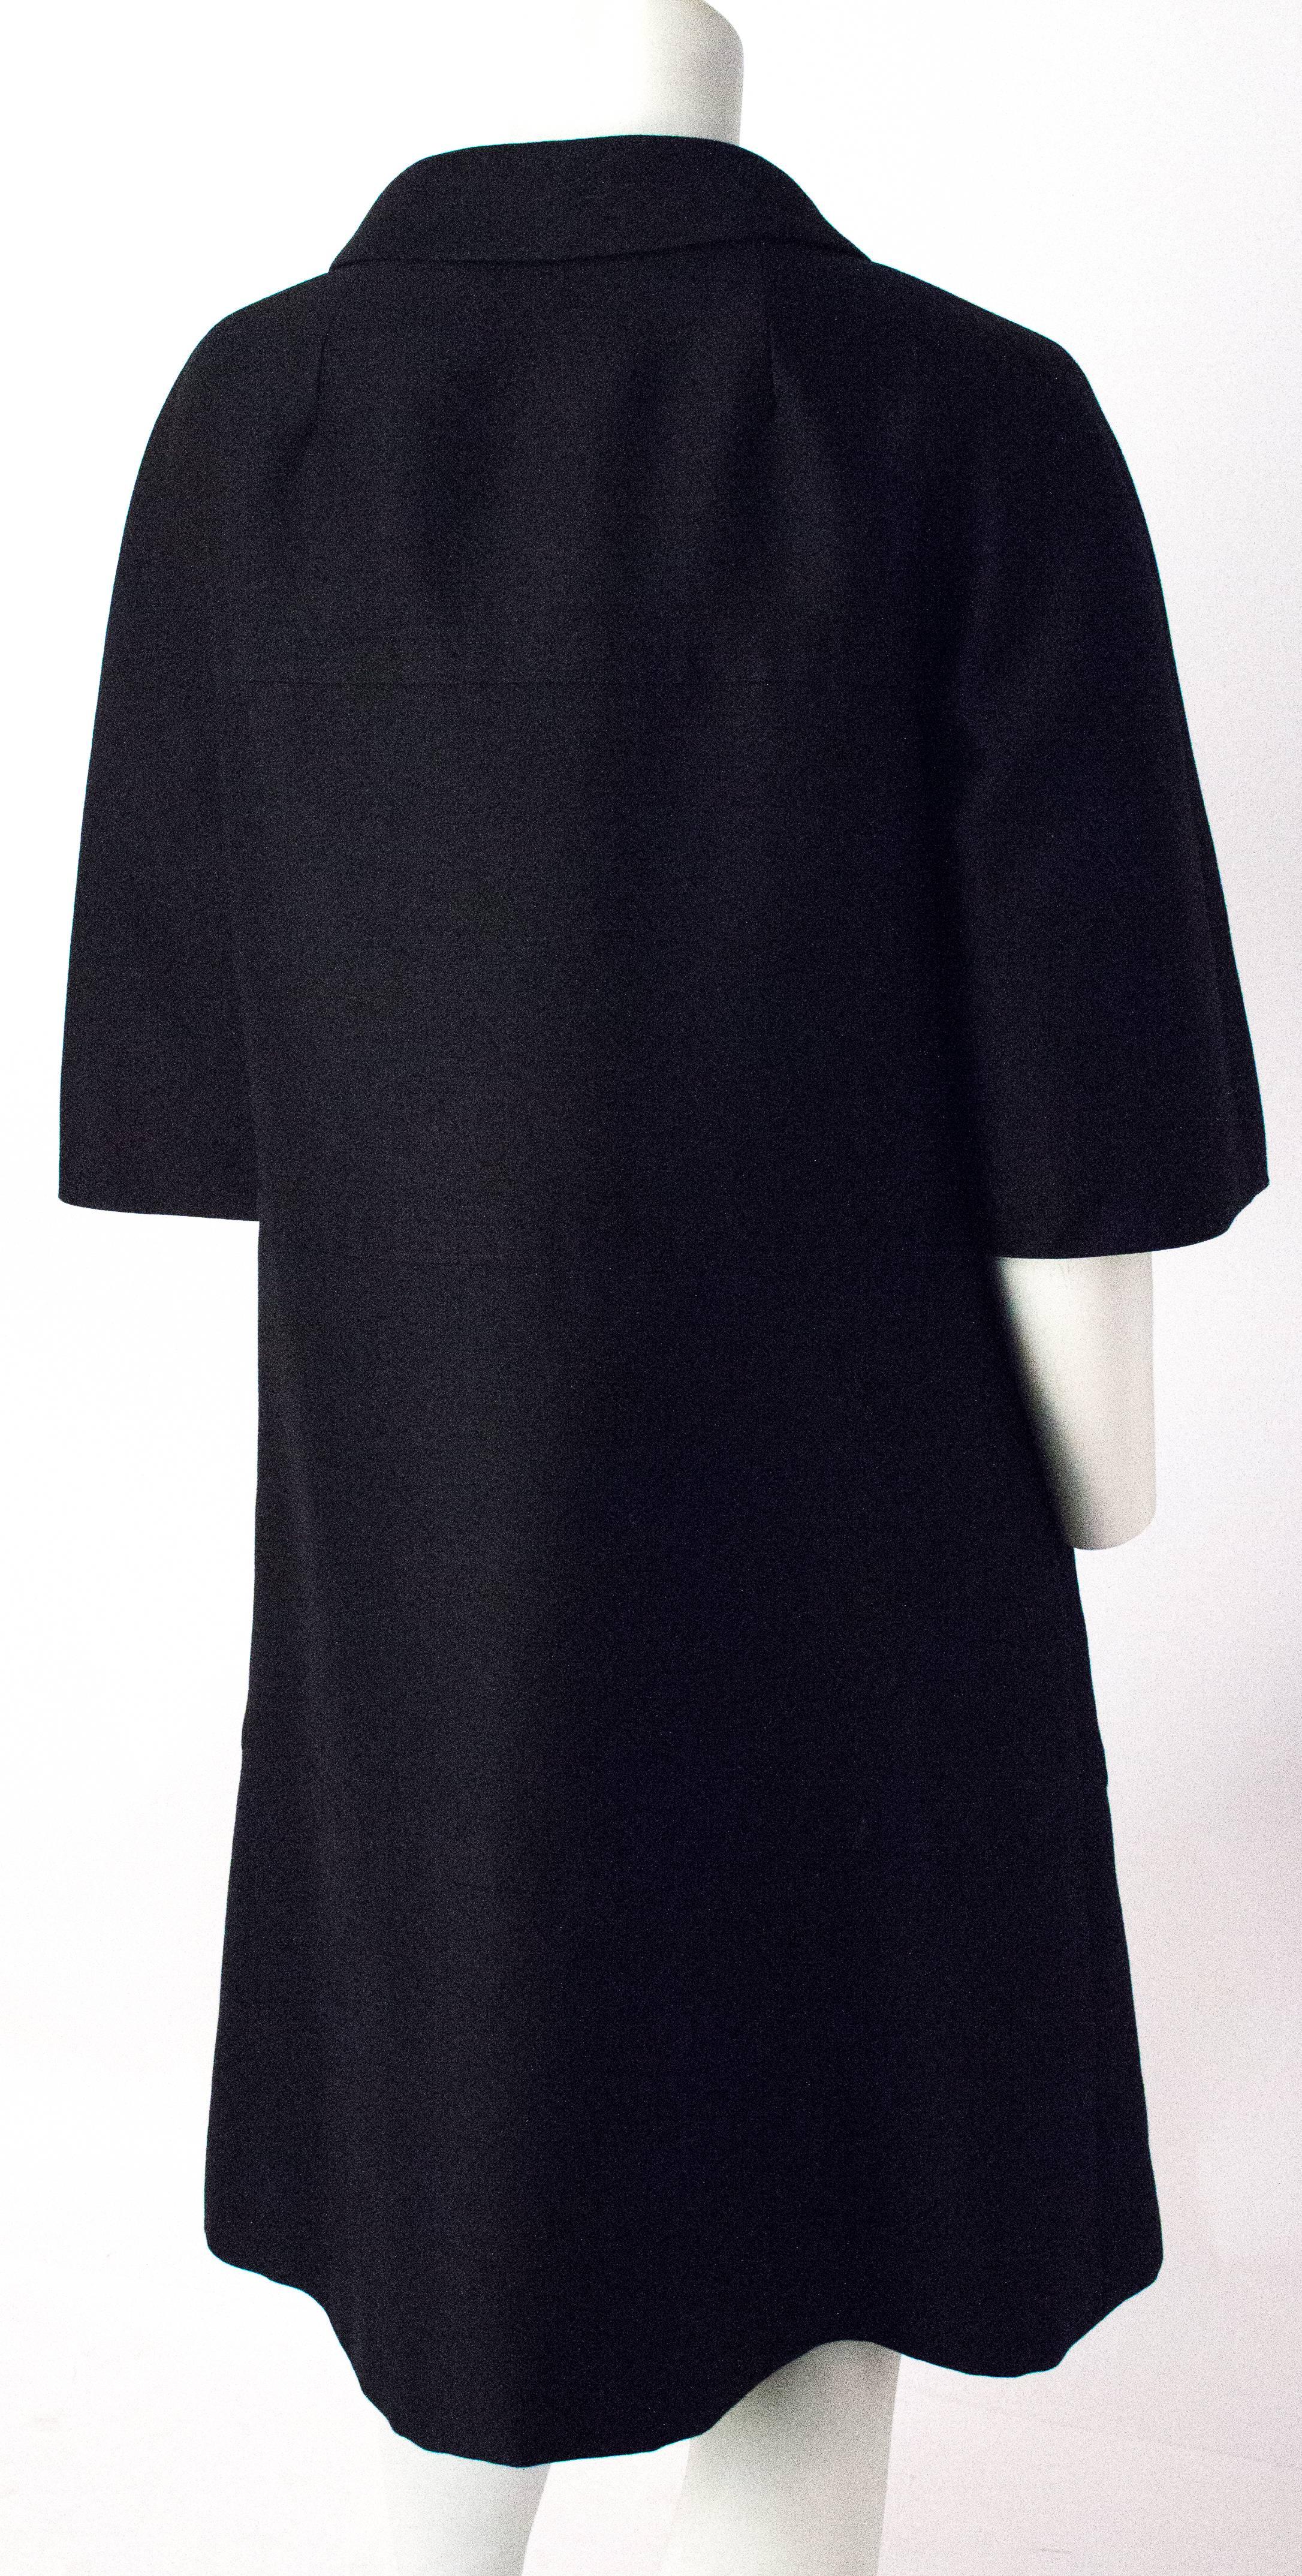 50s Saks Fifth Ave Black Silk Trapeze Coat. Glove length sleeves. Approximately  US size small to medium. 